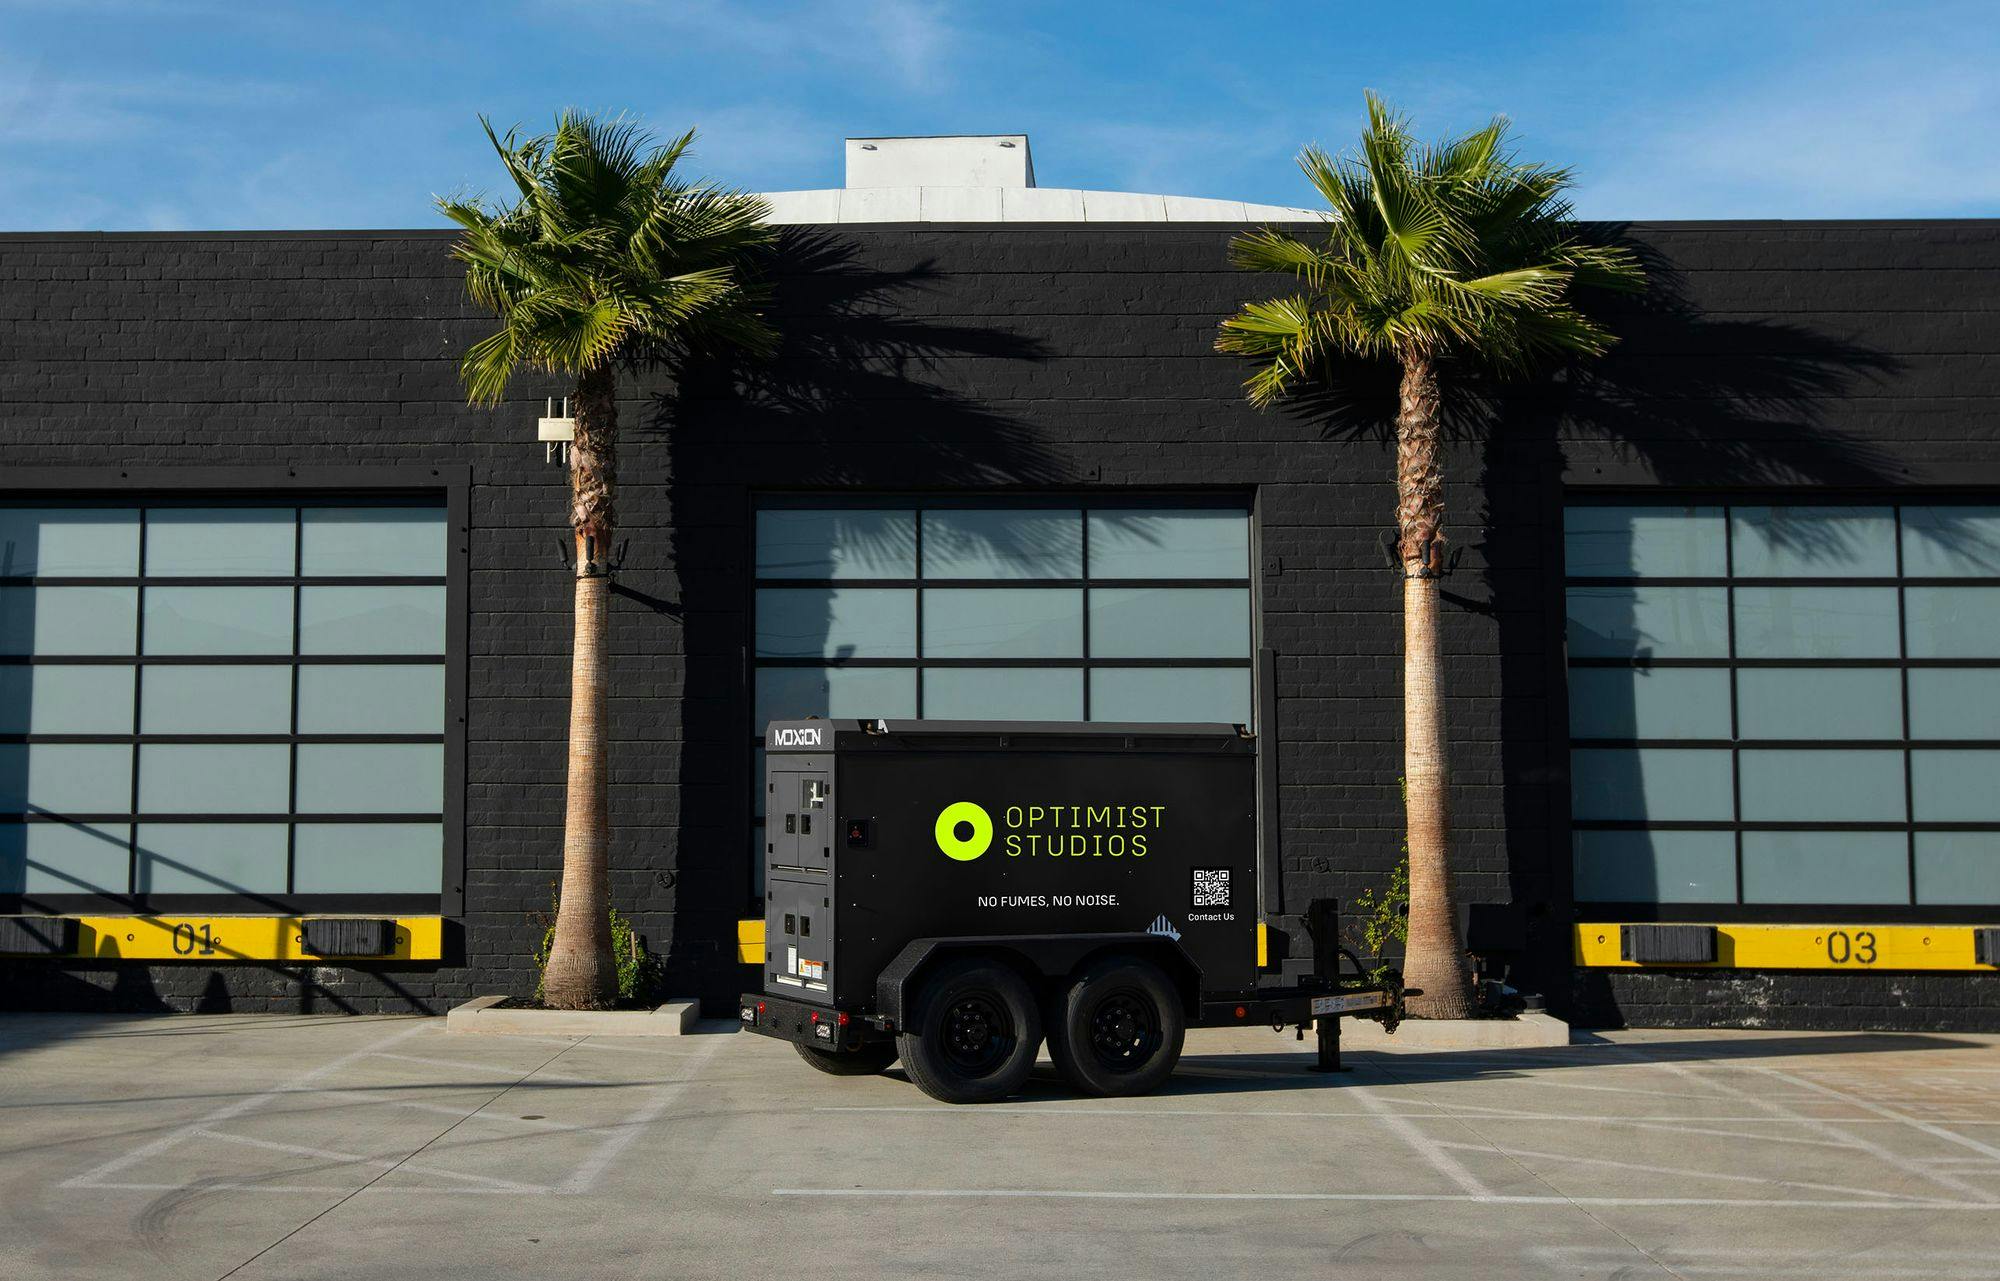 Image features a Moxion generator trailer parked in front of a building with a modern and eco-conscious design. The generator is marked with the logo and branding of "OPTIMIST STUDIOS," emphasizing their commitment to environmentally friendly practices with the slogans "NO FUMES, NO NOISE."